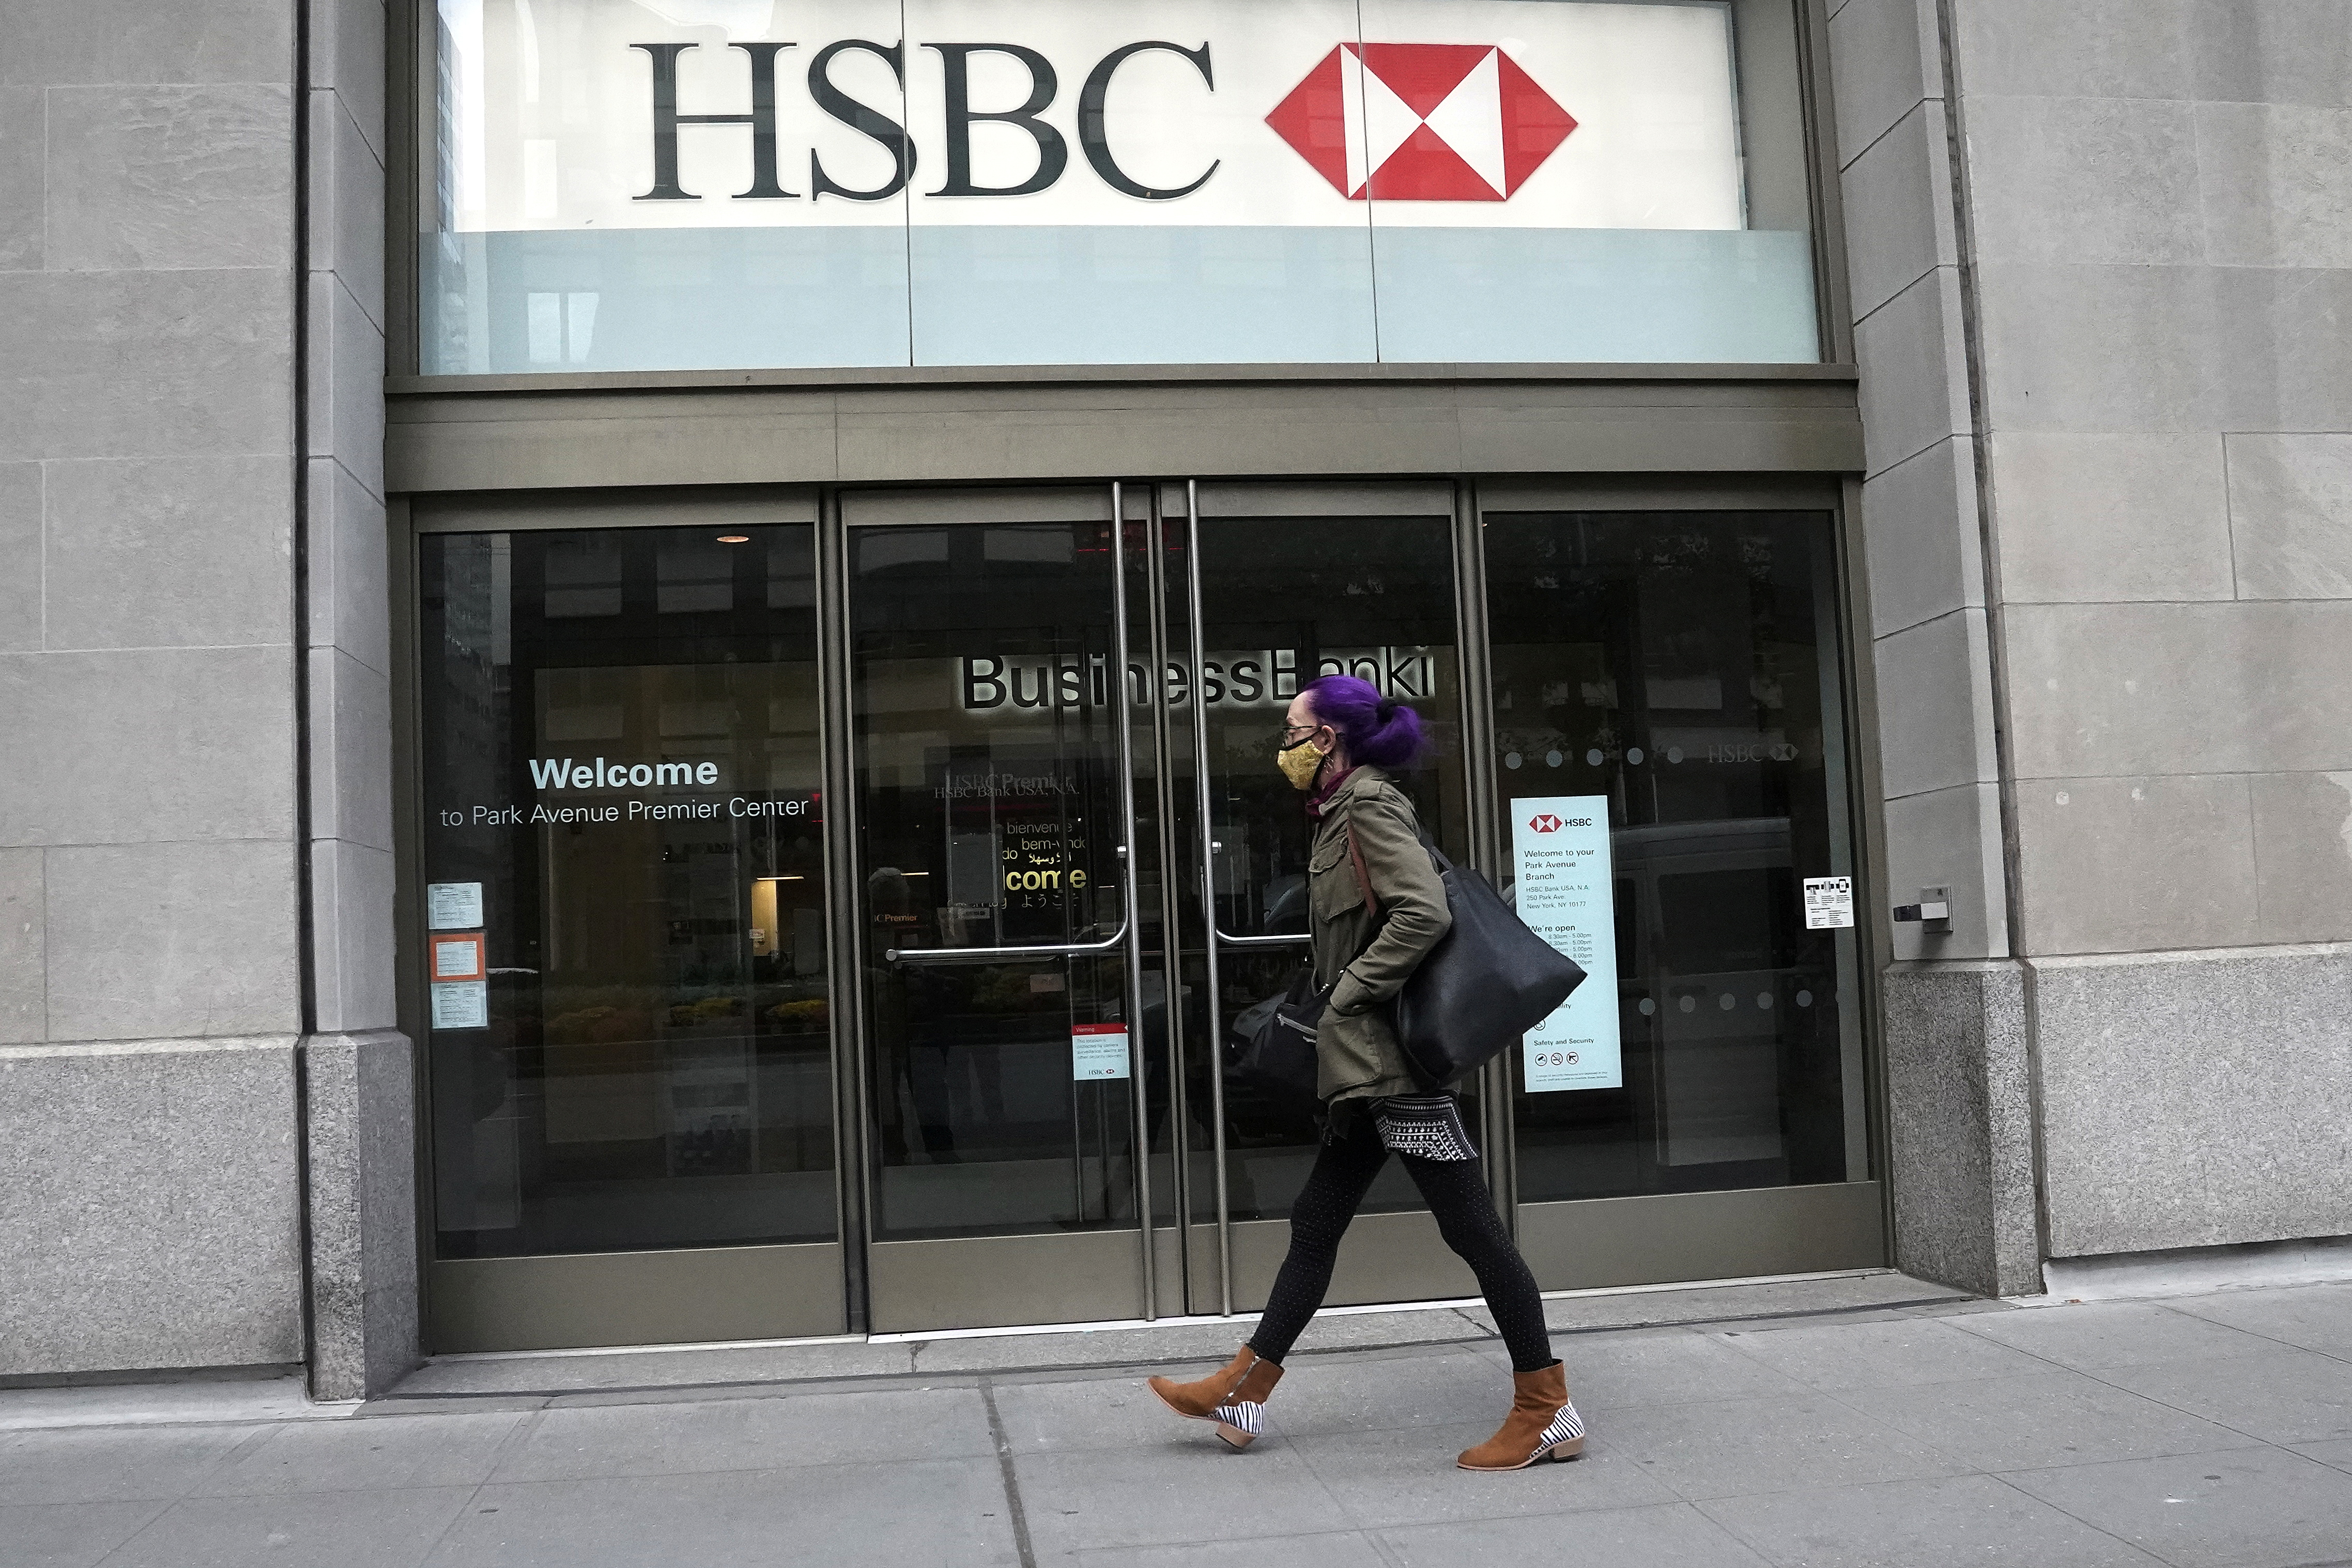 An HSBC bank is pictured during the coronavirus disease (COVID-19) pandemic in the Manhattan borough of New York City, New York, U.S., October 19, 2020. REUTERS/Carlo Allegri